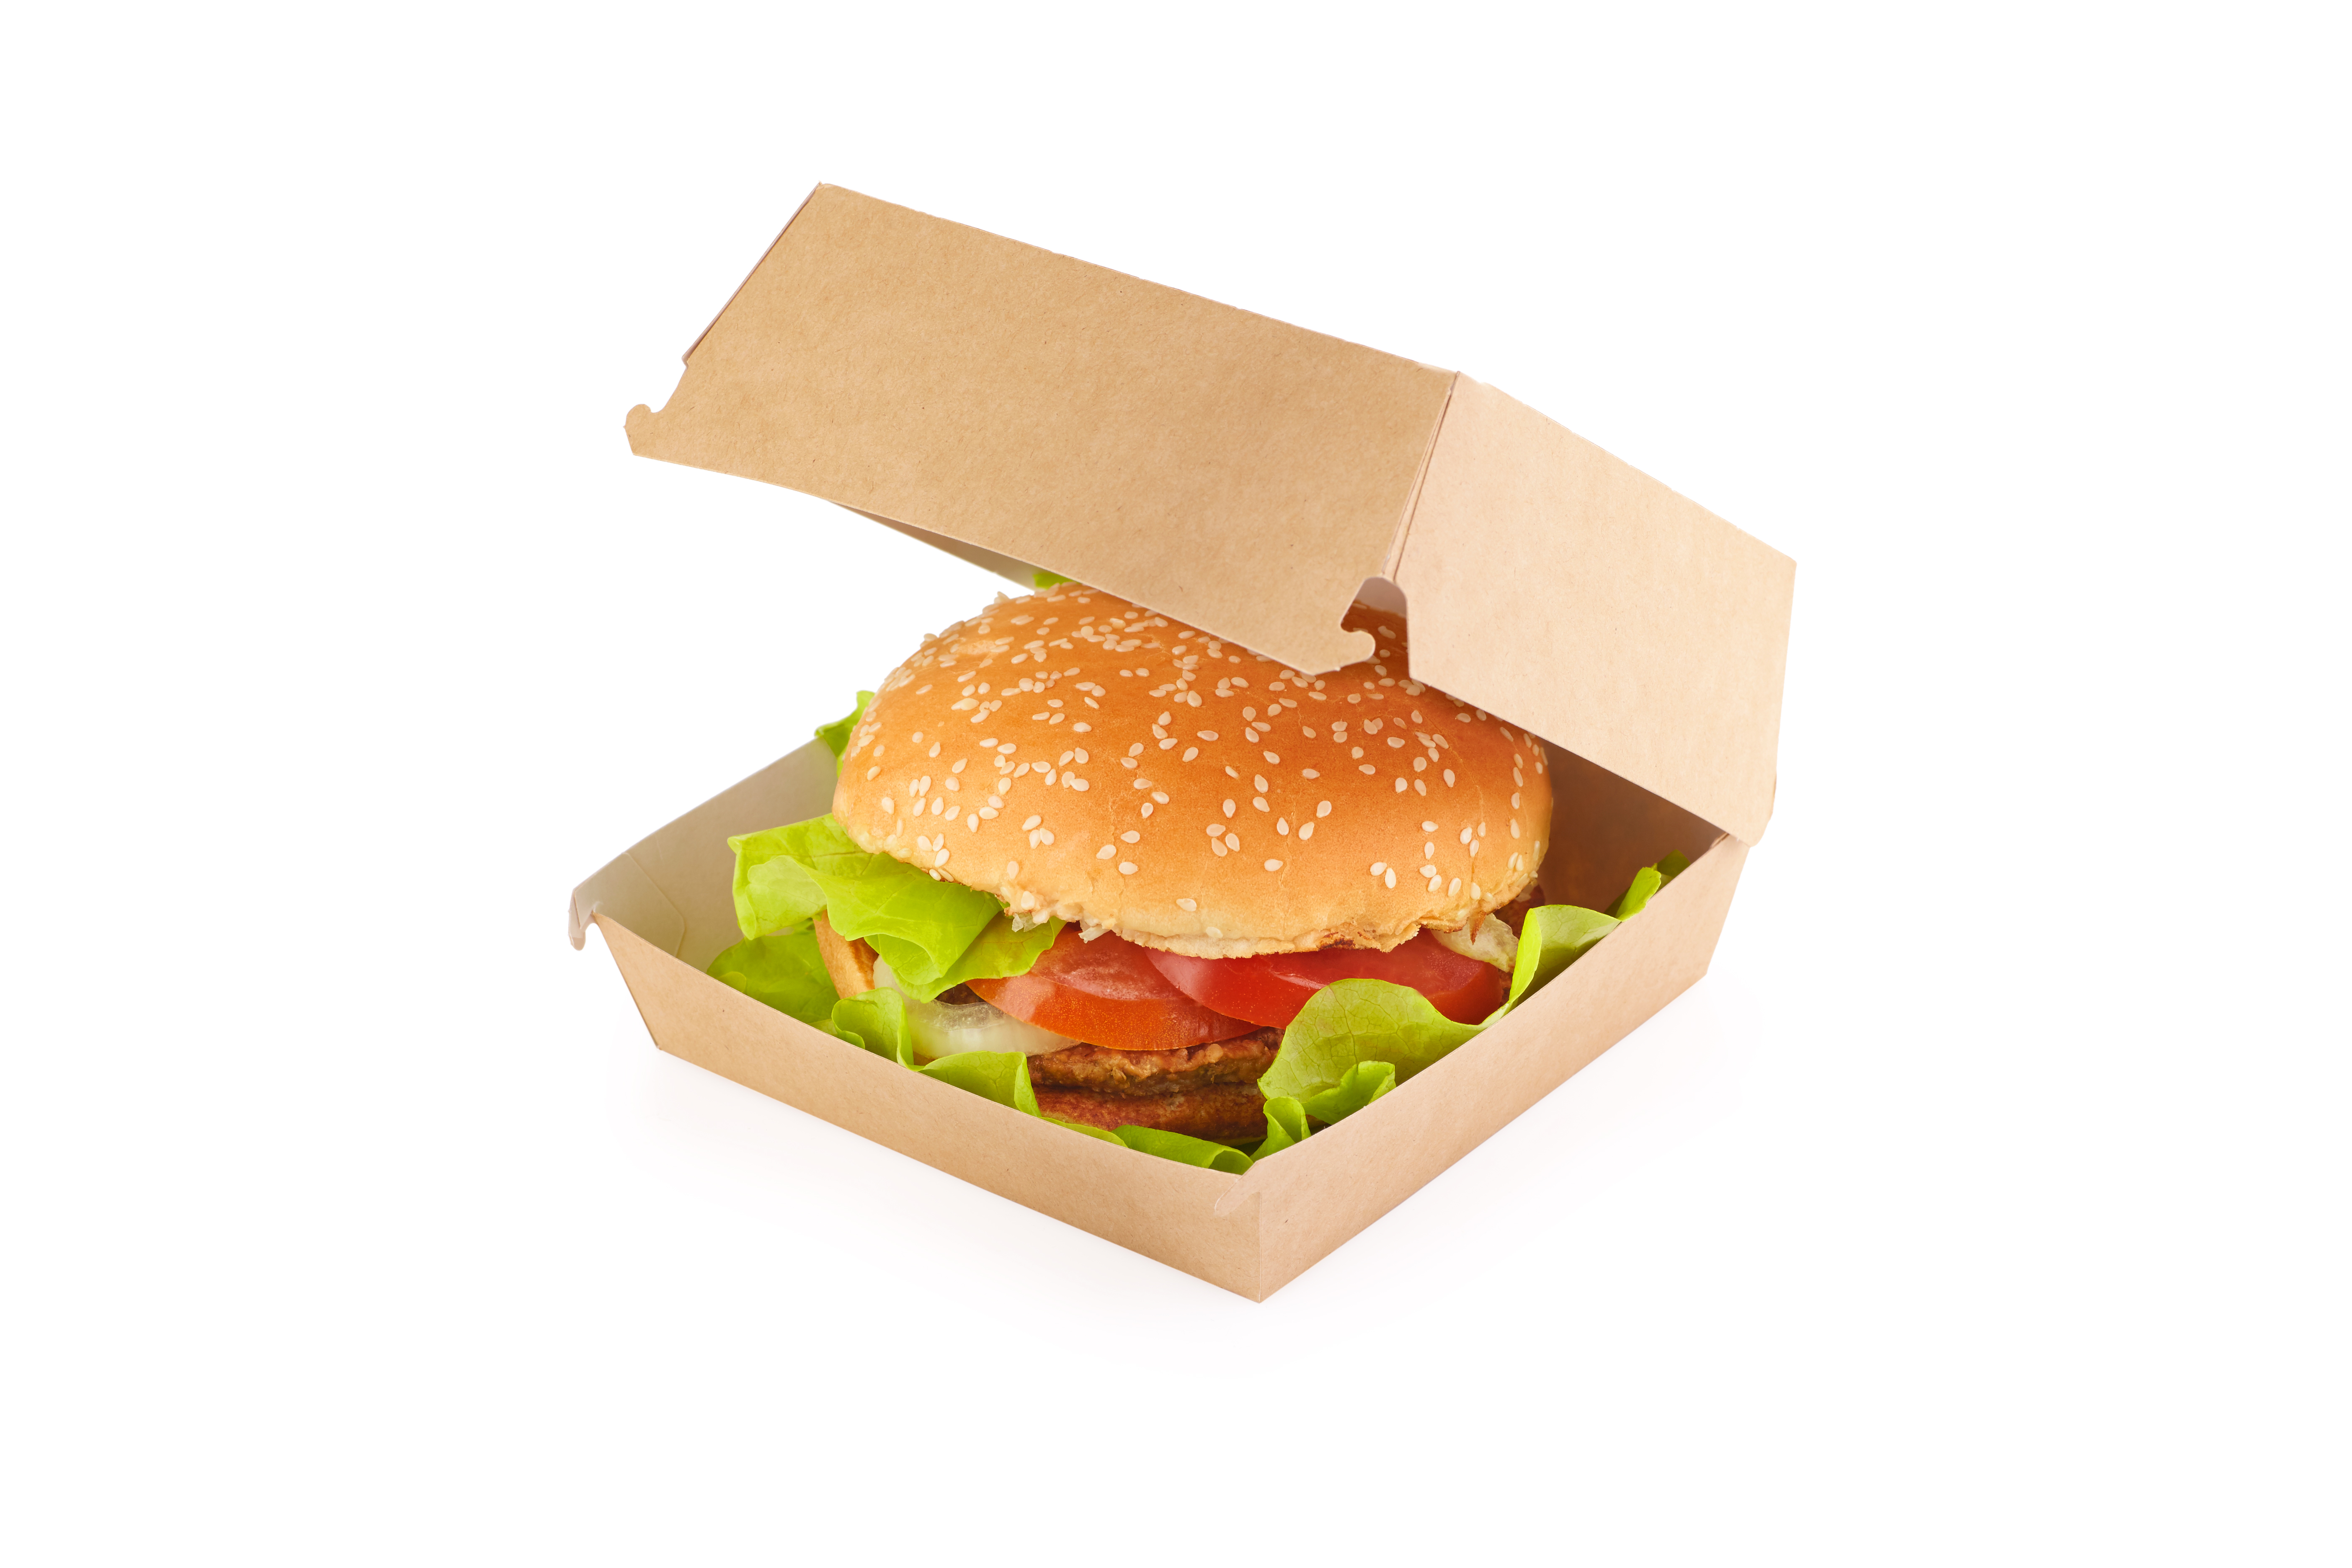 OSQ BURGER M packaging for burgers